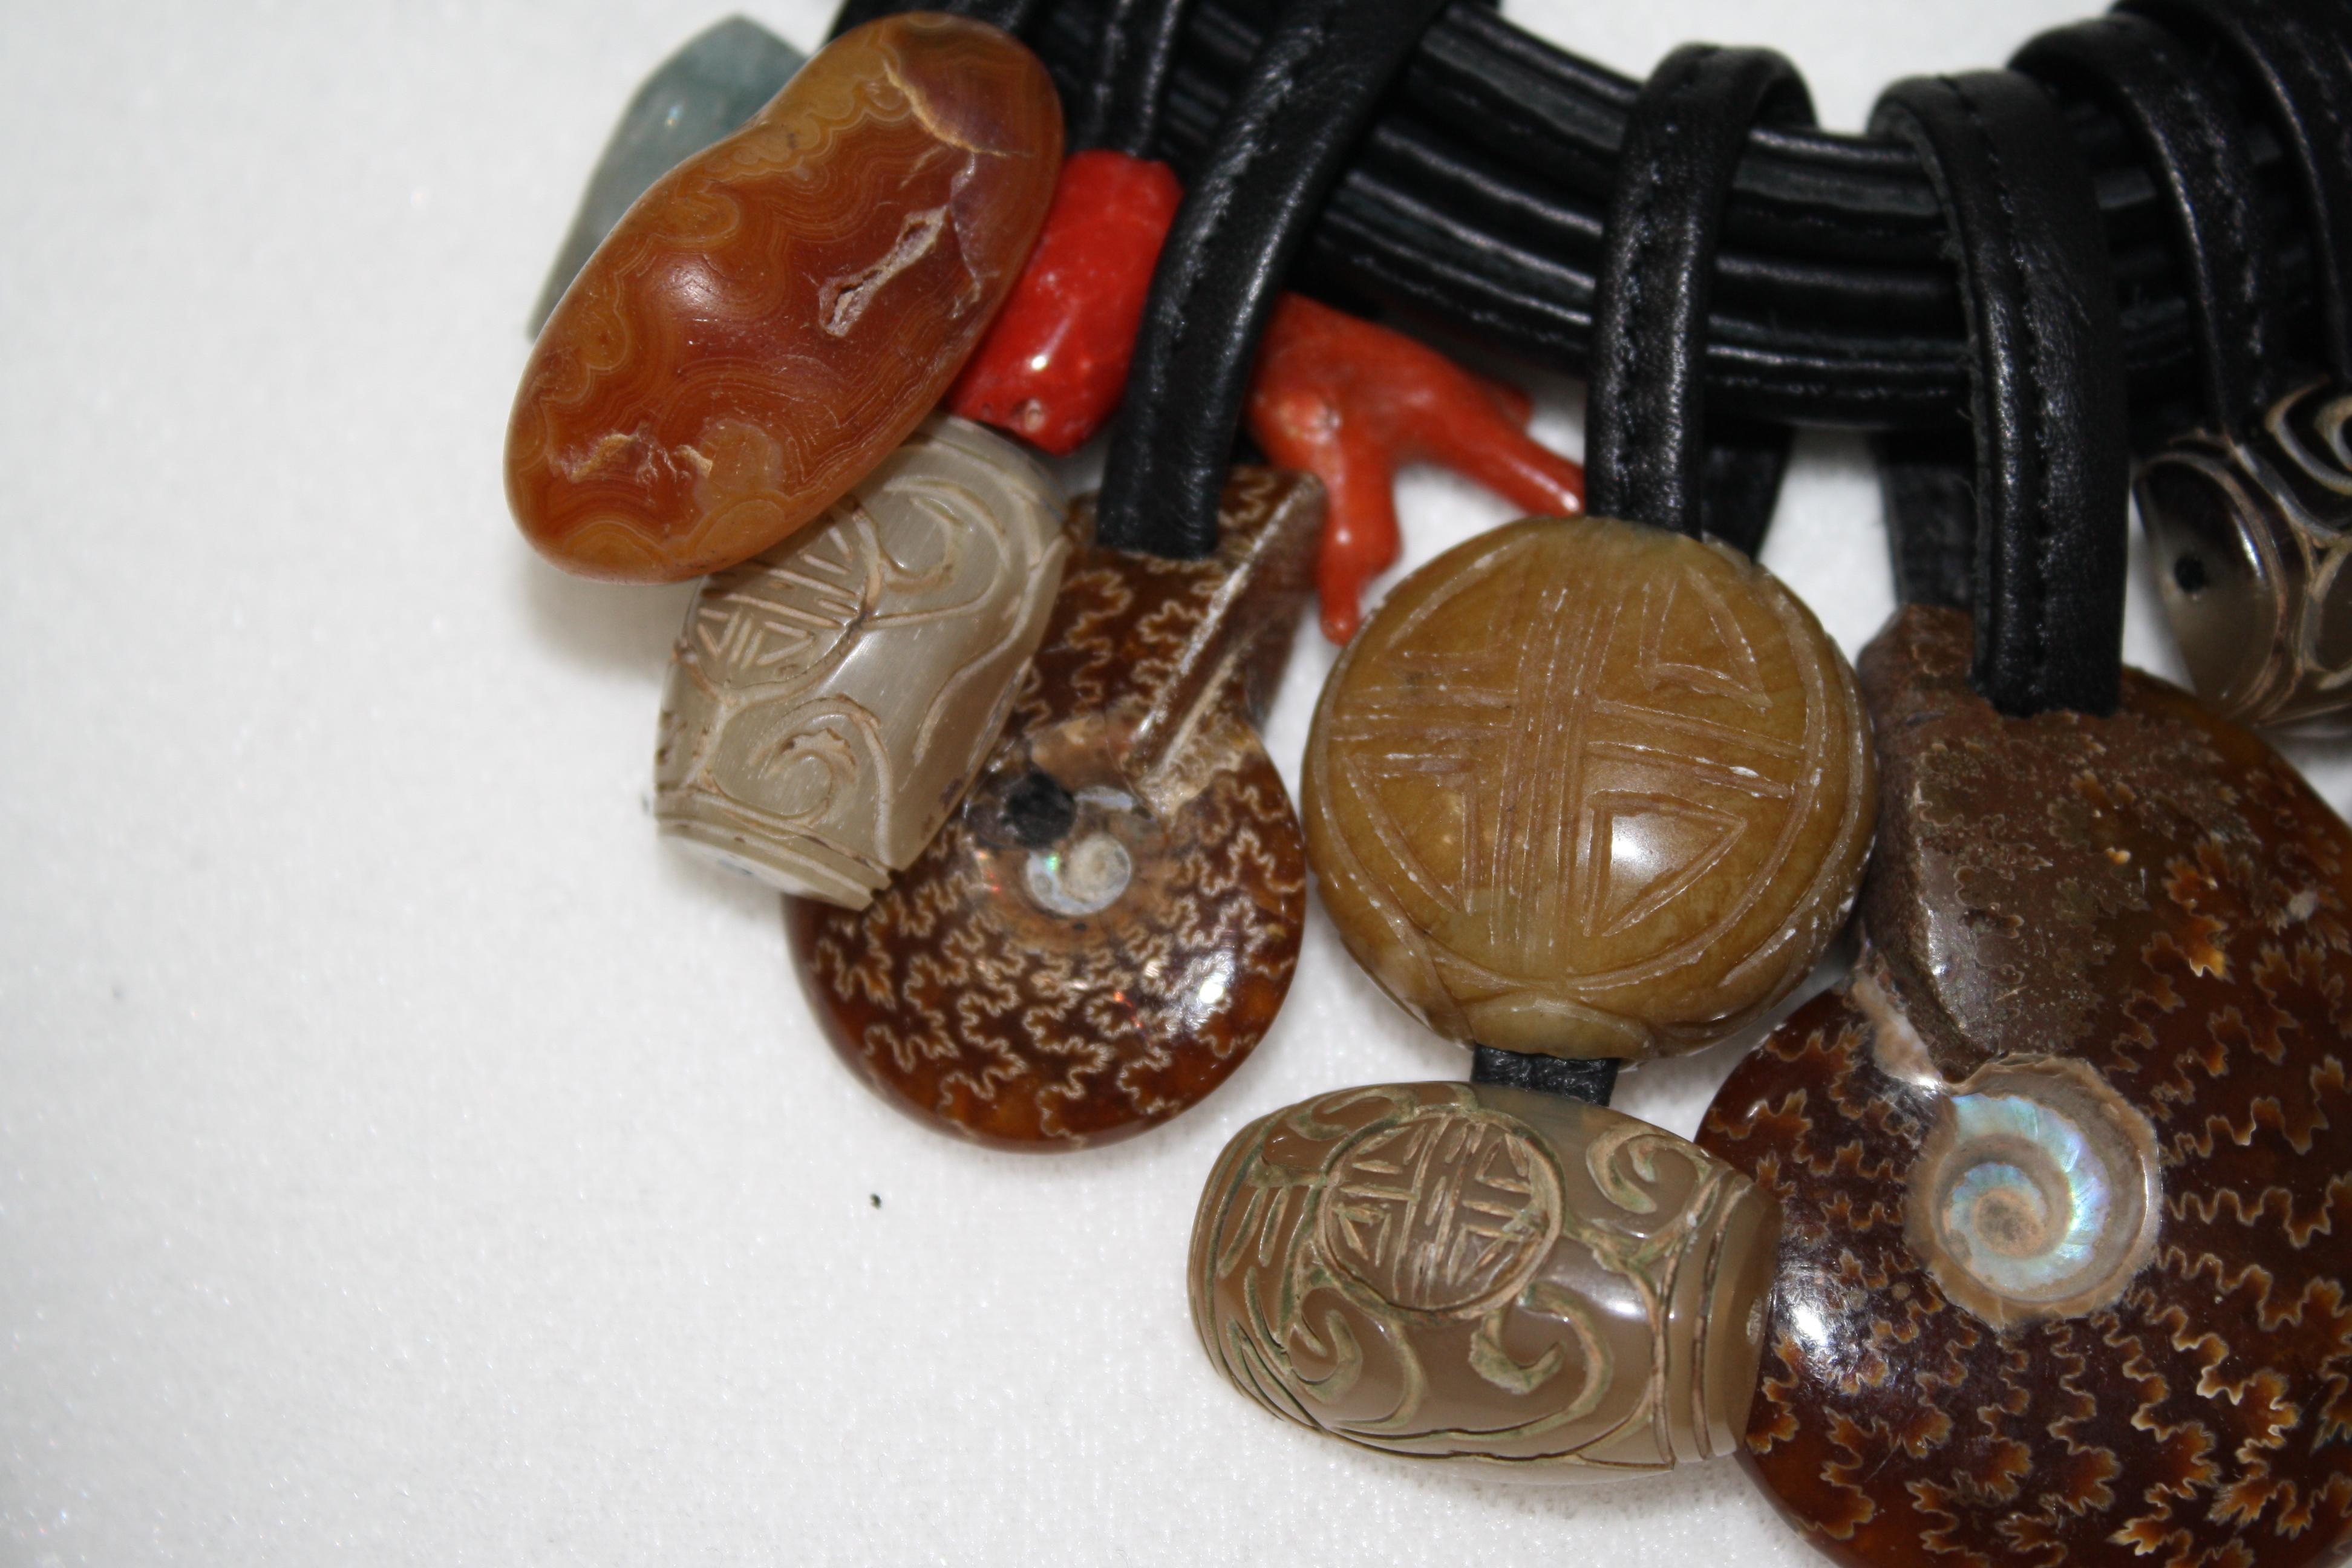 One of a kind semi precious stone threaded on leather can slide around for different looks. Toggle clasp with ammonite stone. Intricate etching and carving on the stones. 8 strands of stitched leather.
Signature on the clasp
A true statement piece